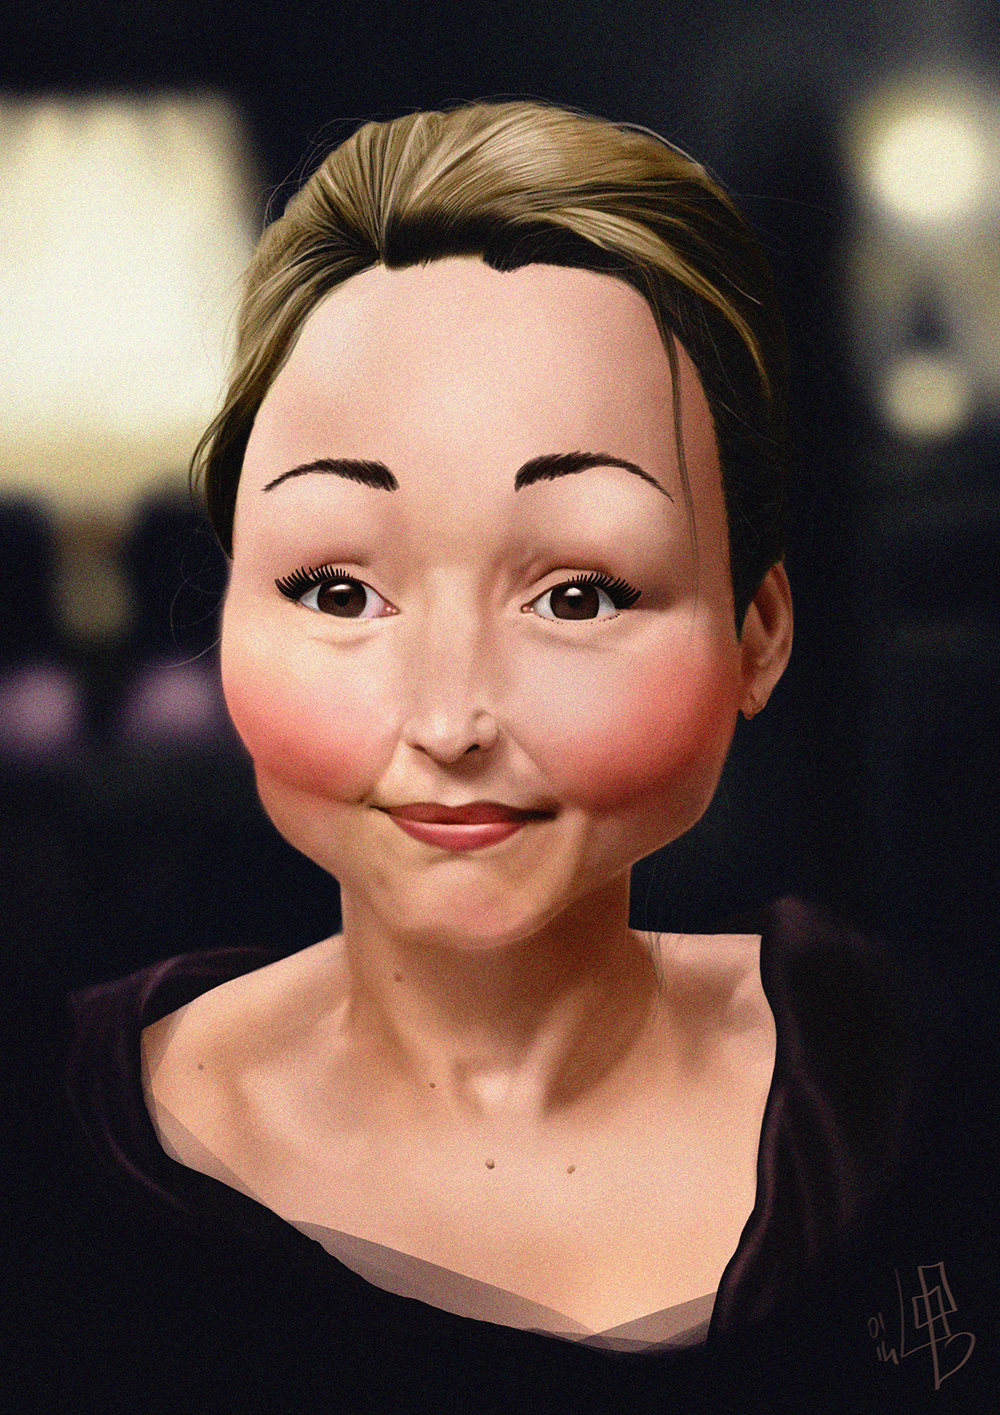 catherine_frot___caricature_by_norab_art-d73i6gu.jpg